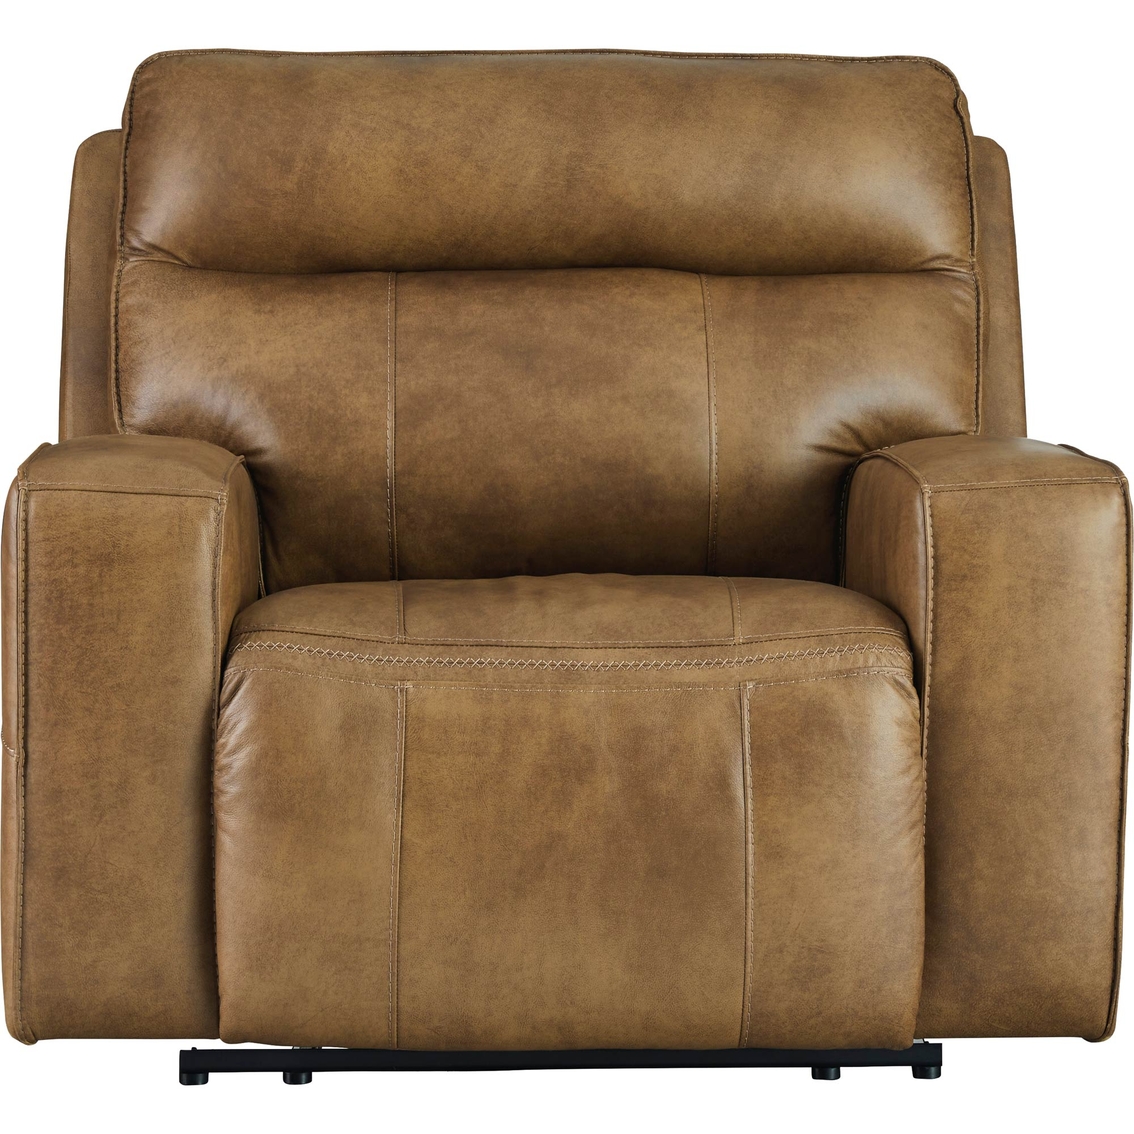 Signature Design by Ashley Game Plan Oversized Power Recliner - Image 2 of 9